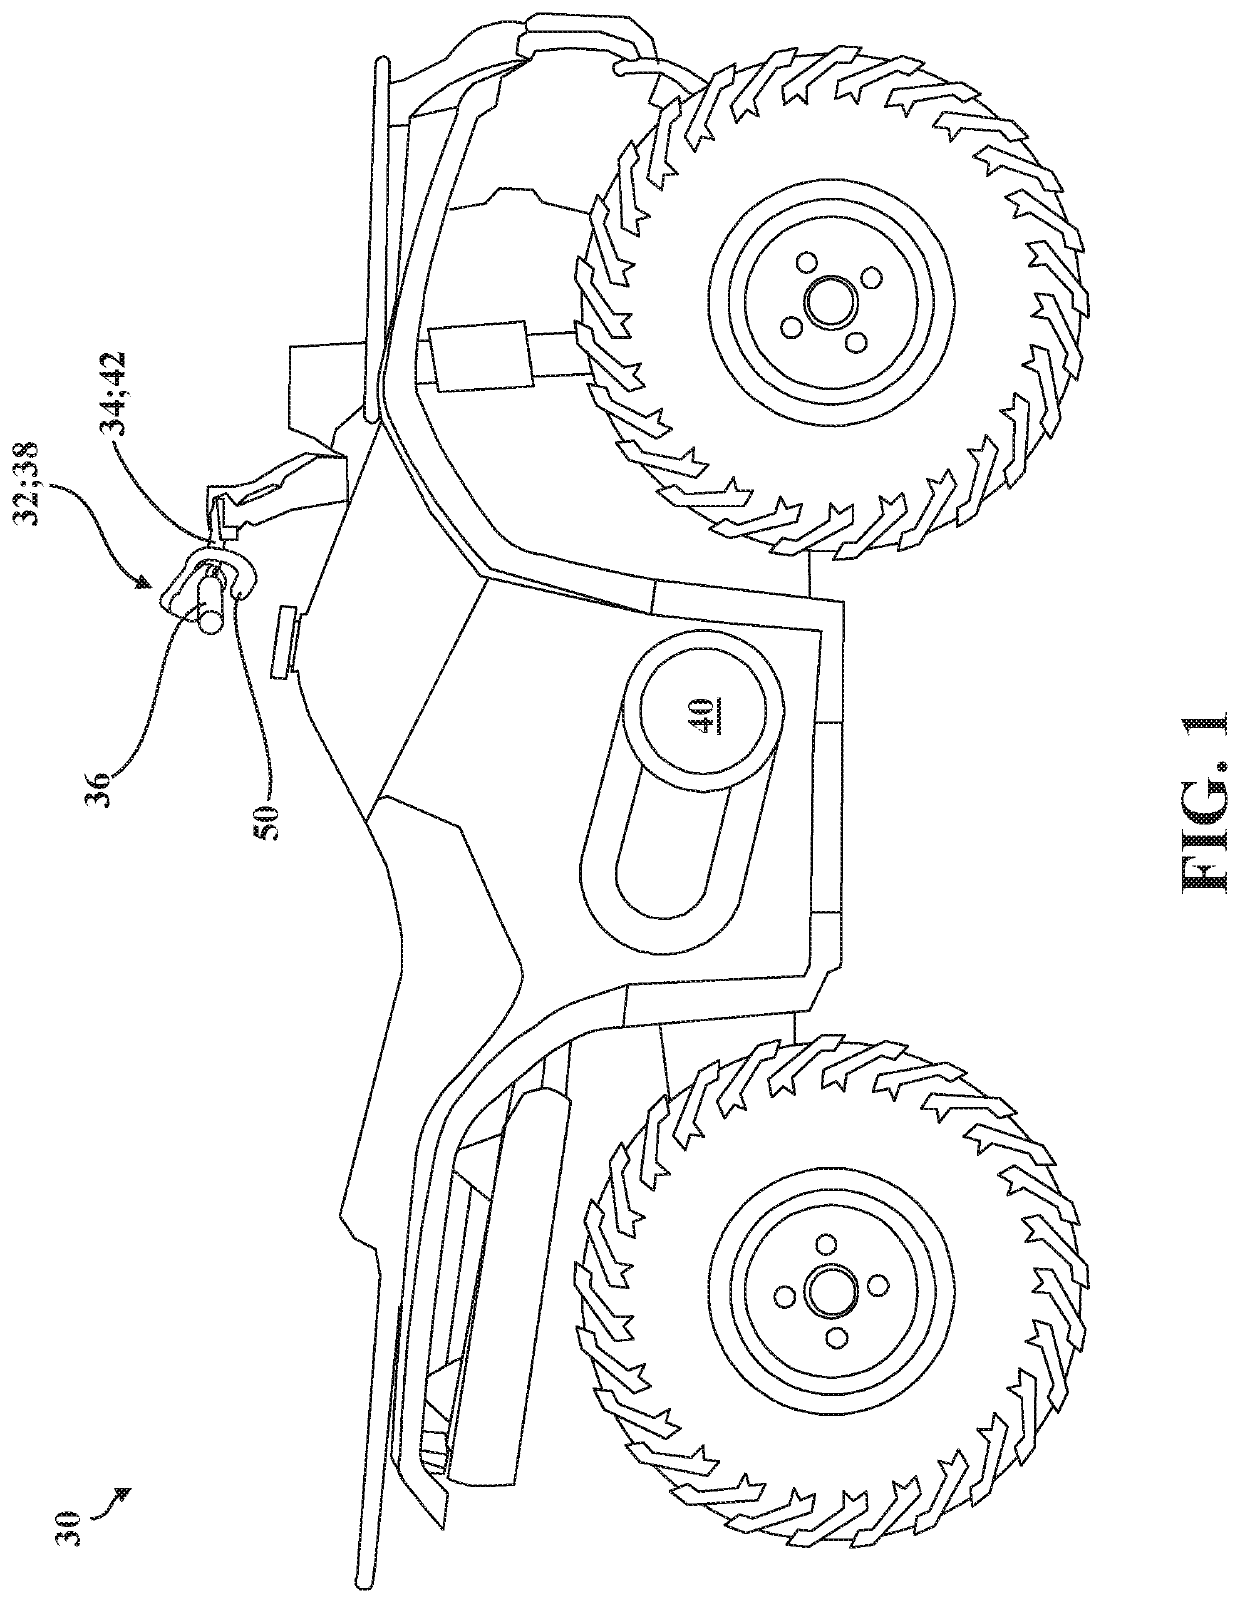 Control systems and throttle assemblies for vehicles having handlebars